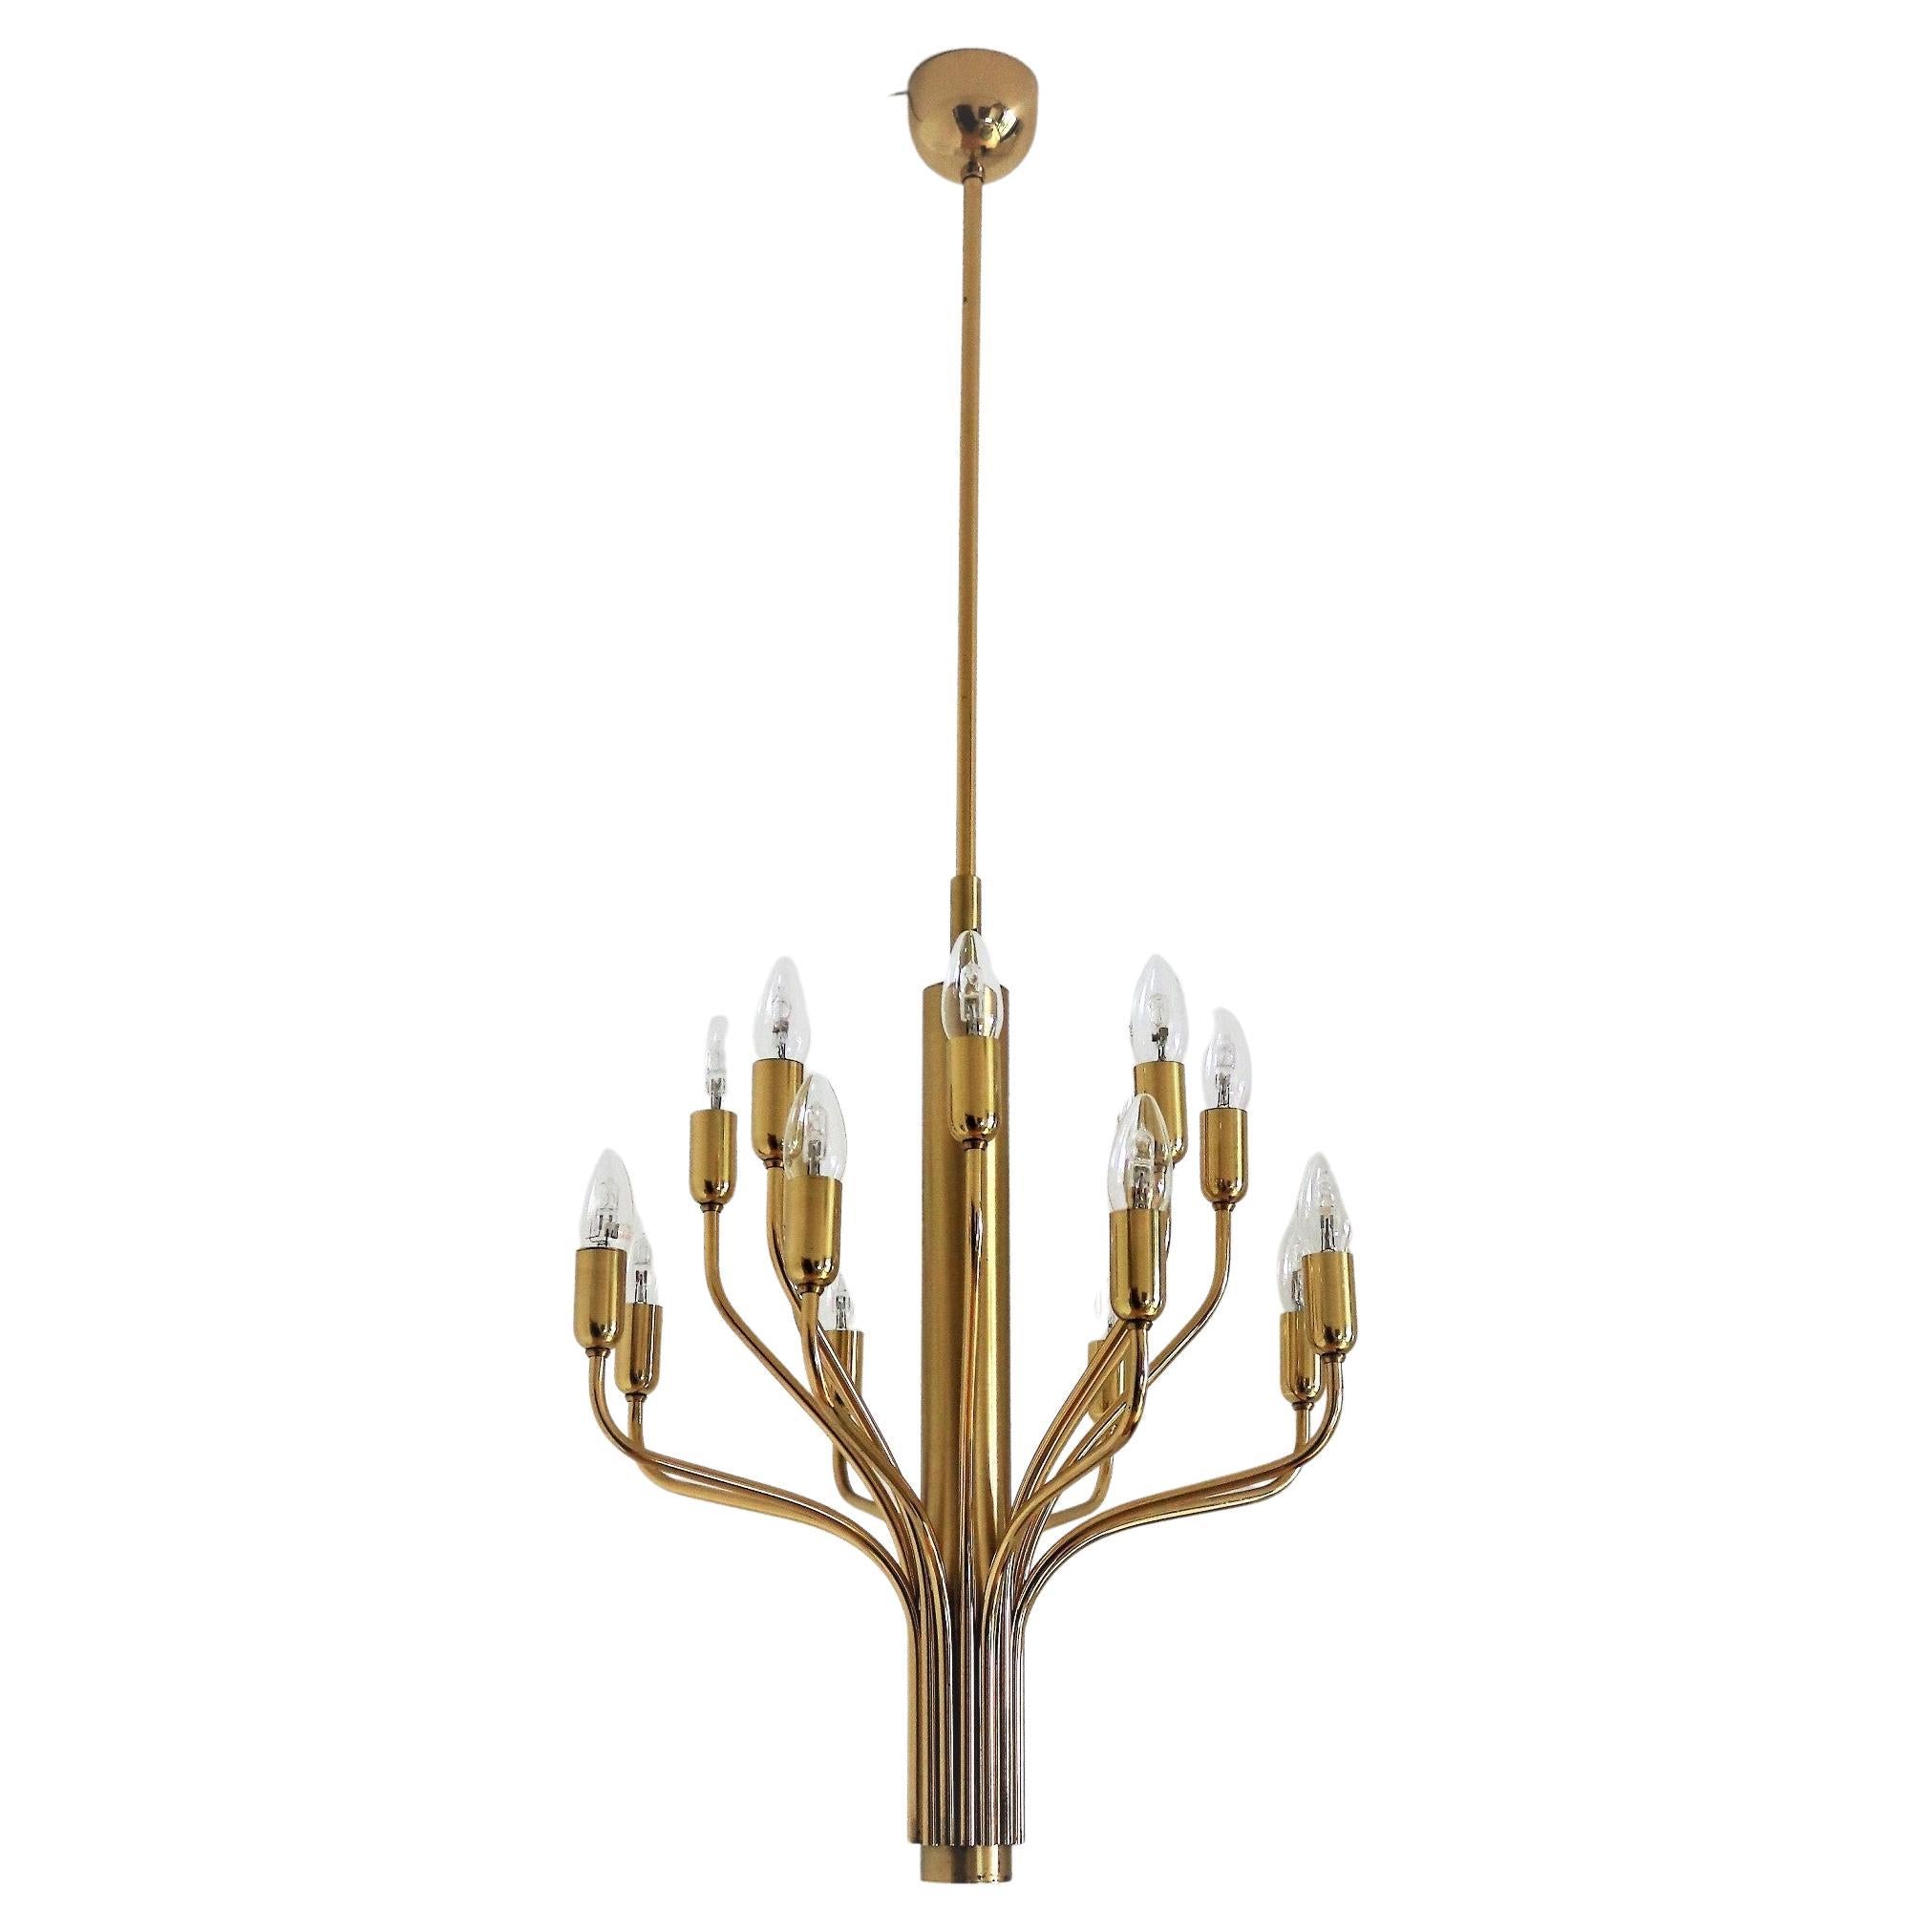 Gorgeous mid-century brass chandelier in the manner of Sciolari made by Staff Leuchten, manufactured in Germany, circa 1970s.
The chandelier is made of full brass and has a long brass rod to ceiling.
Excellent craftsmanship.
Very good working